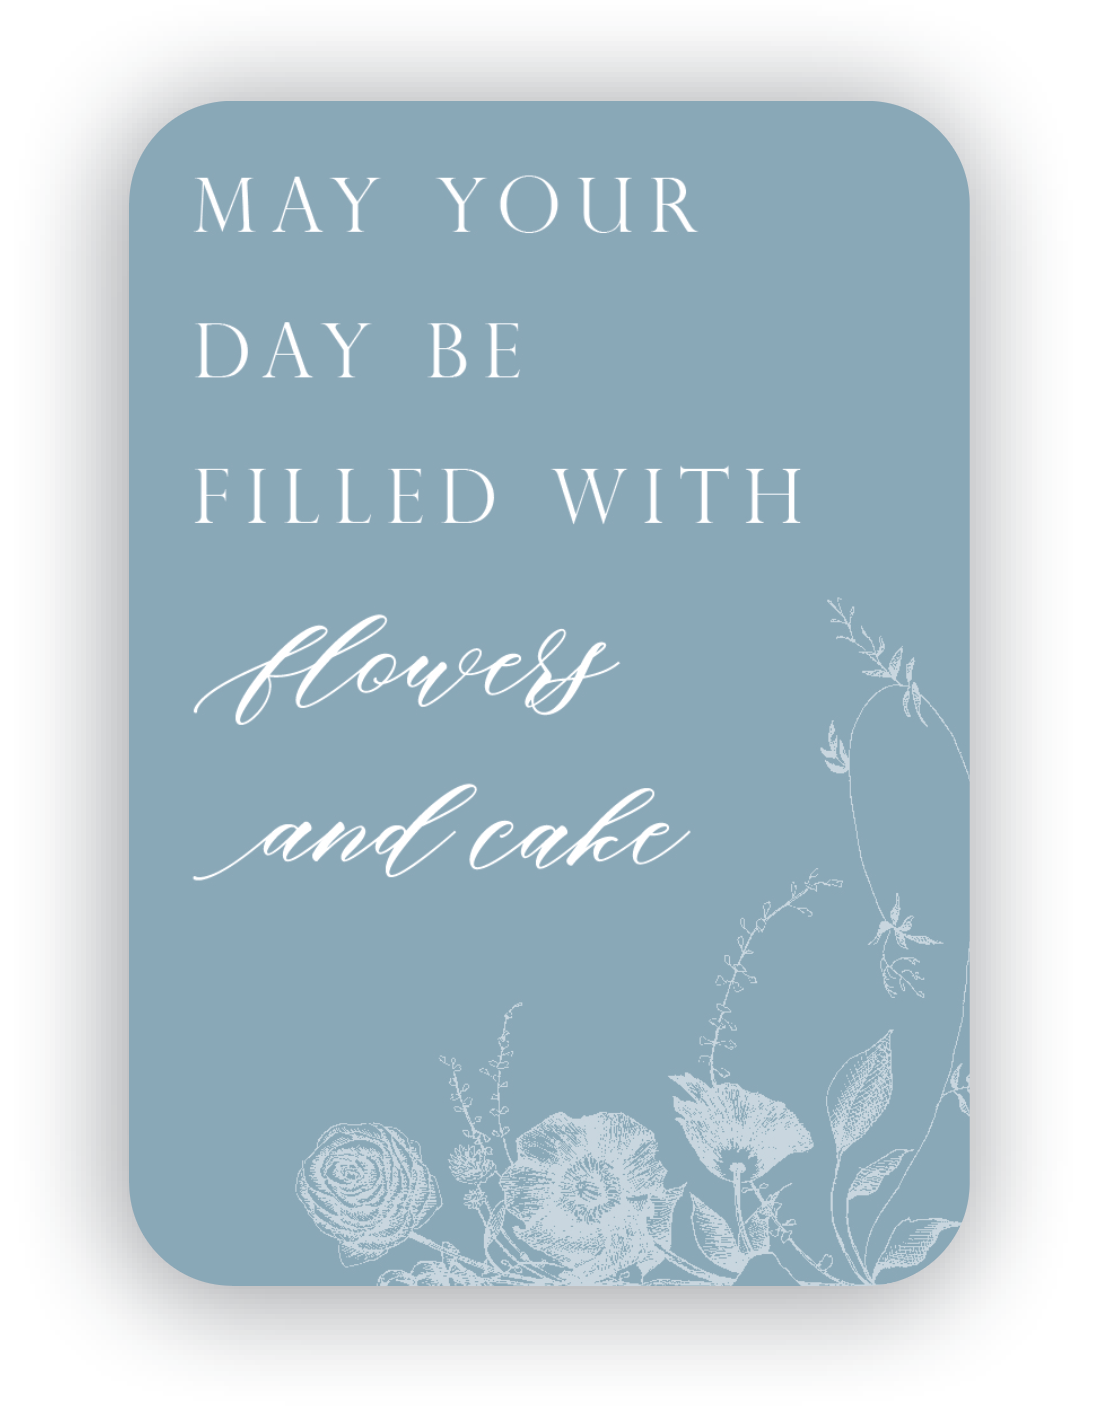 Digital dusty blue mini card with florals that says "May your day be filled with flowers and cake" by Rust Belt Love